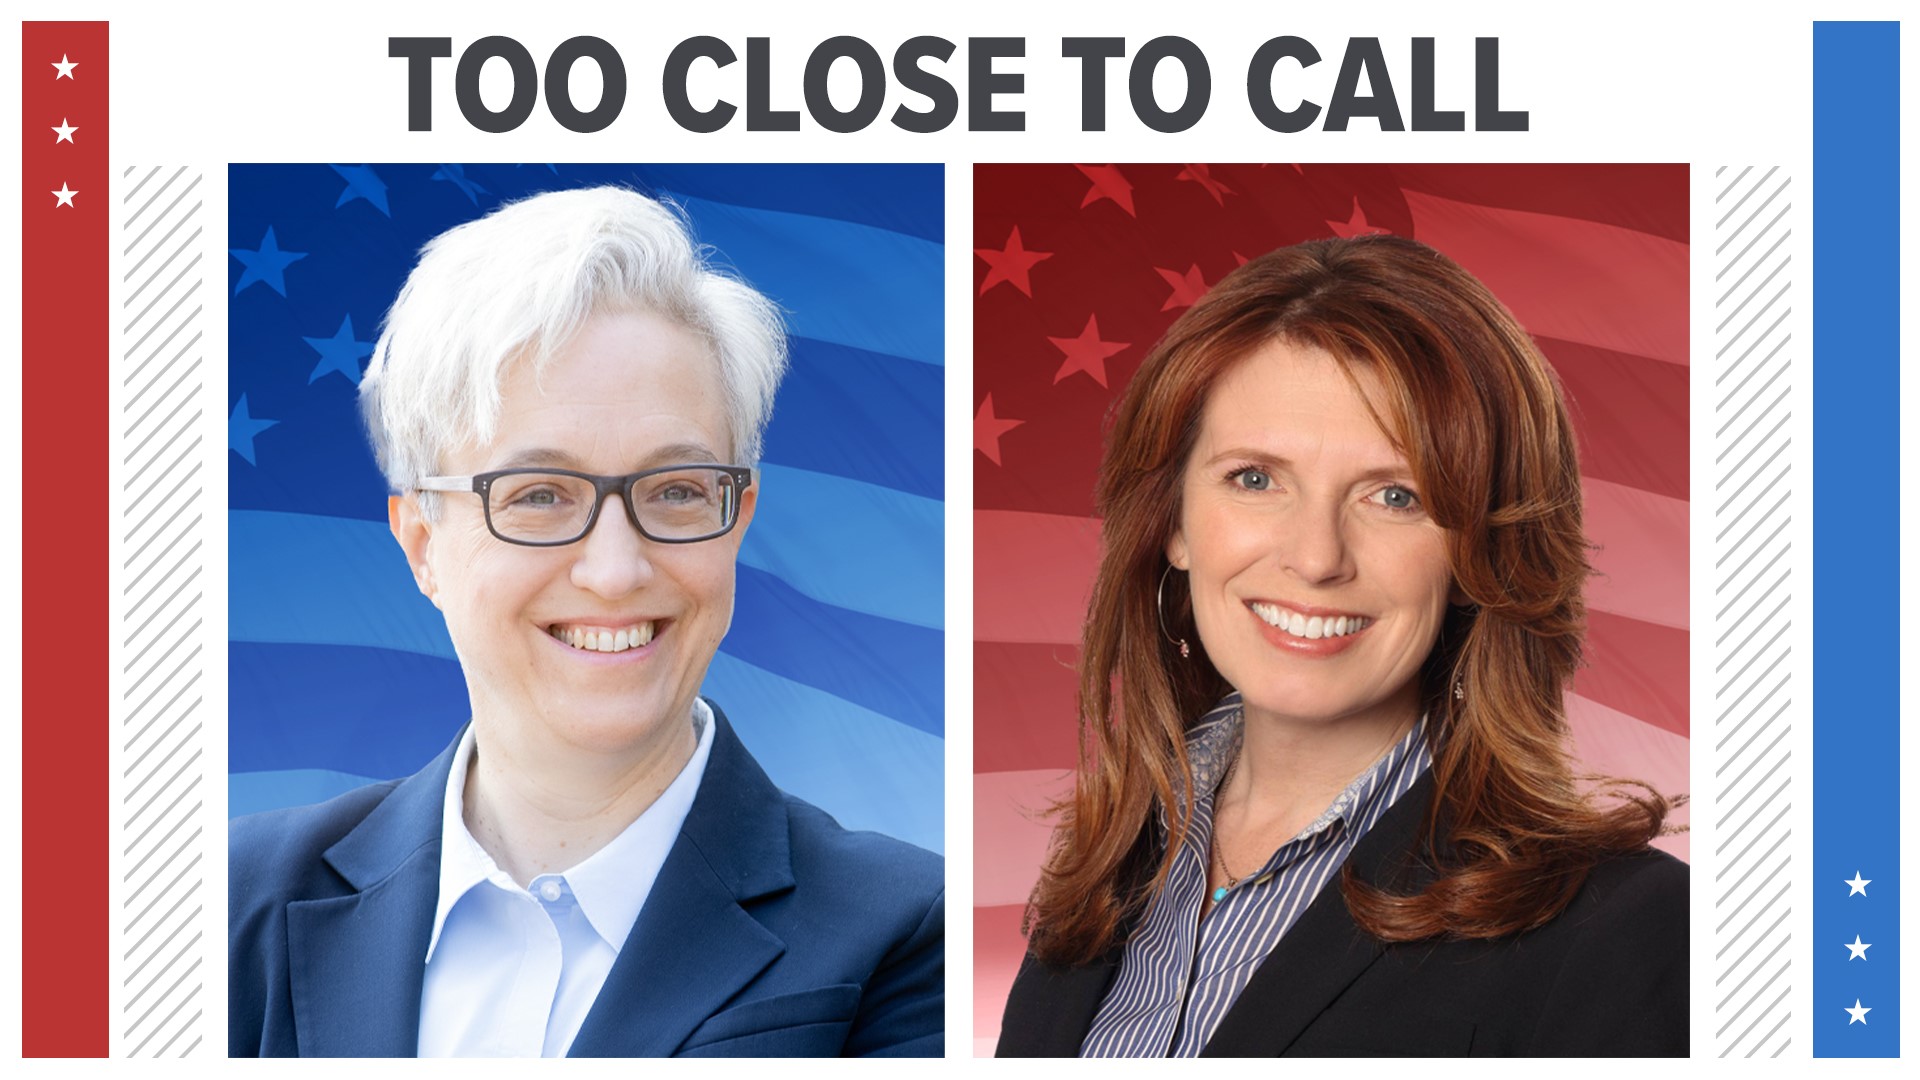 Tina Kotek held a razor-thin lead over Christine Drazan in early results Tuesday night. Unaffiliated candidate Betsy Johnson acknowledged she wouldn’t win.